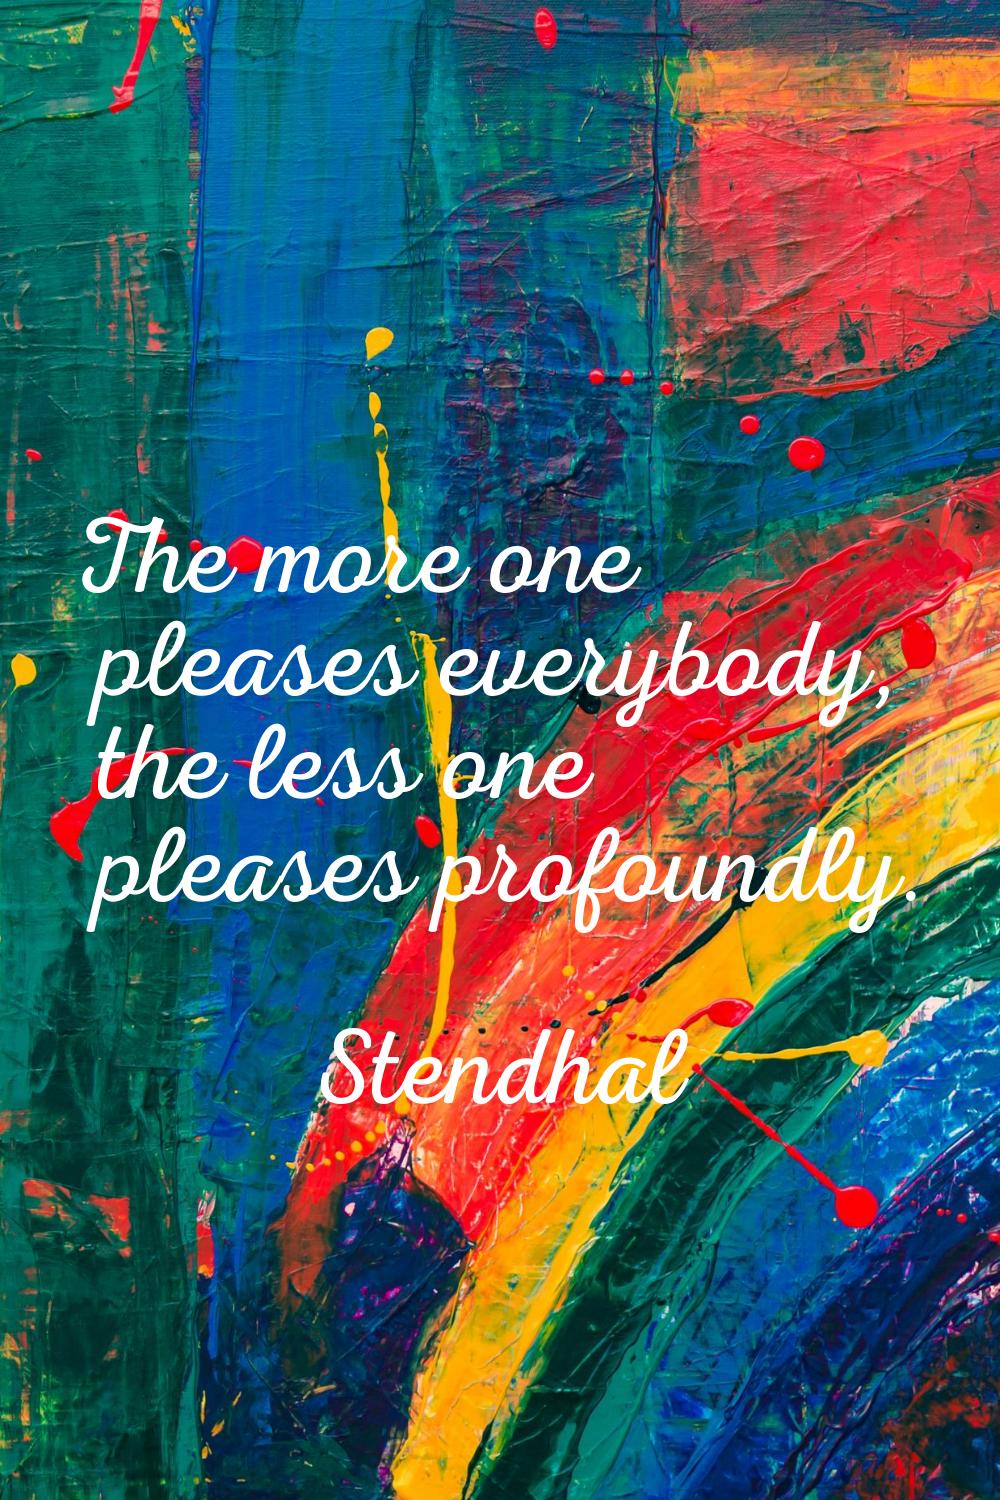 The more one pleases everybody, the less one pleases profoundly.